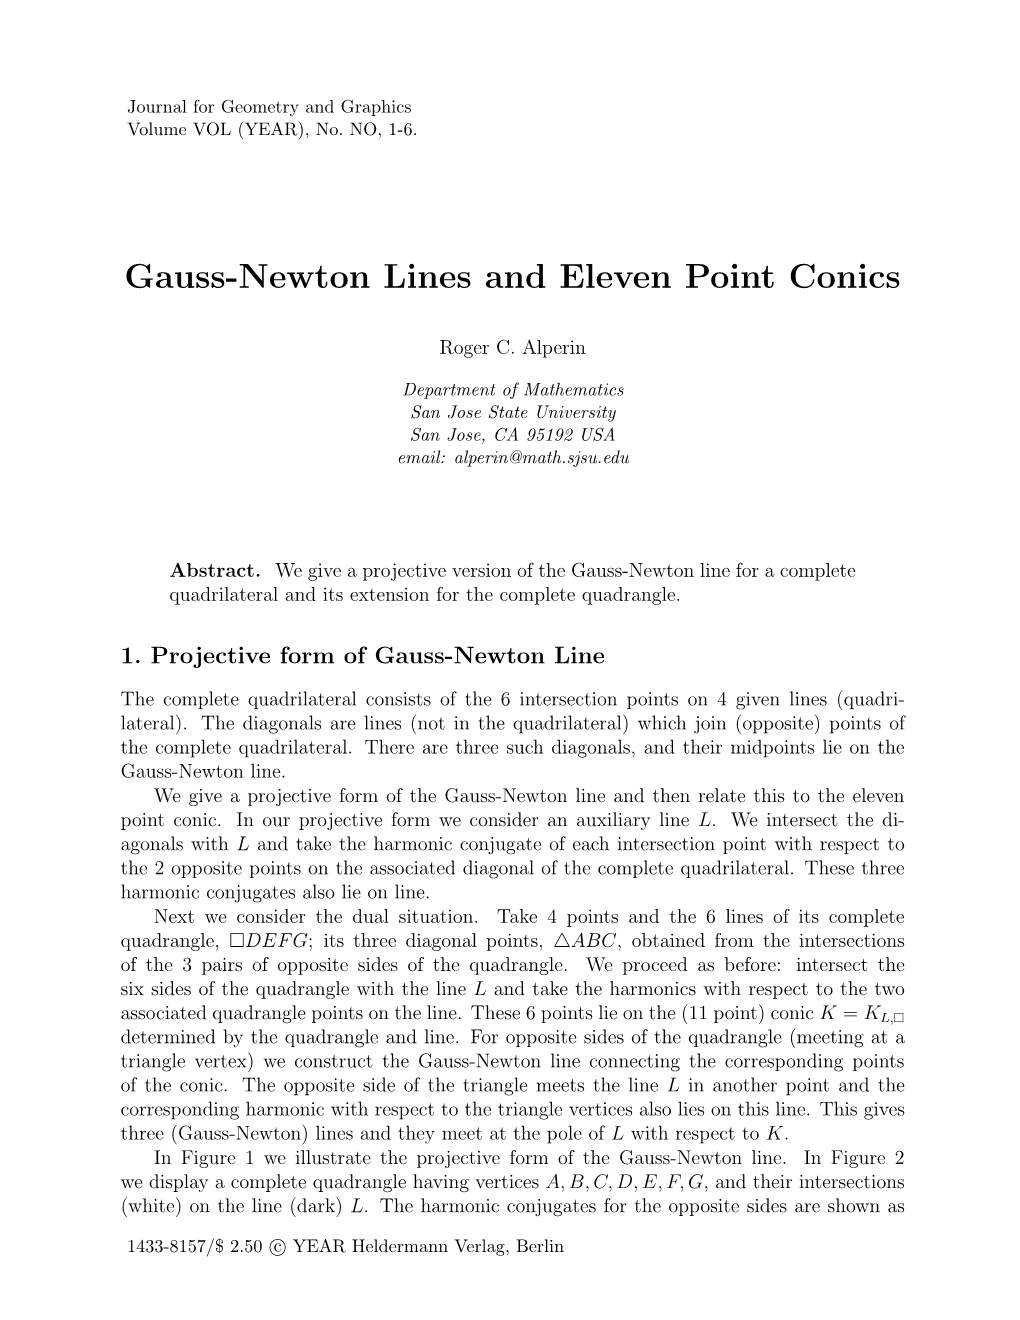 Gauss-Newton Lines and Eleven Point Conics